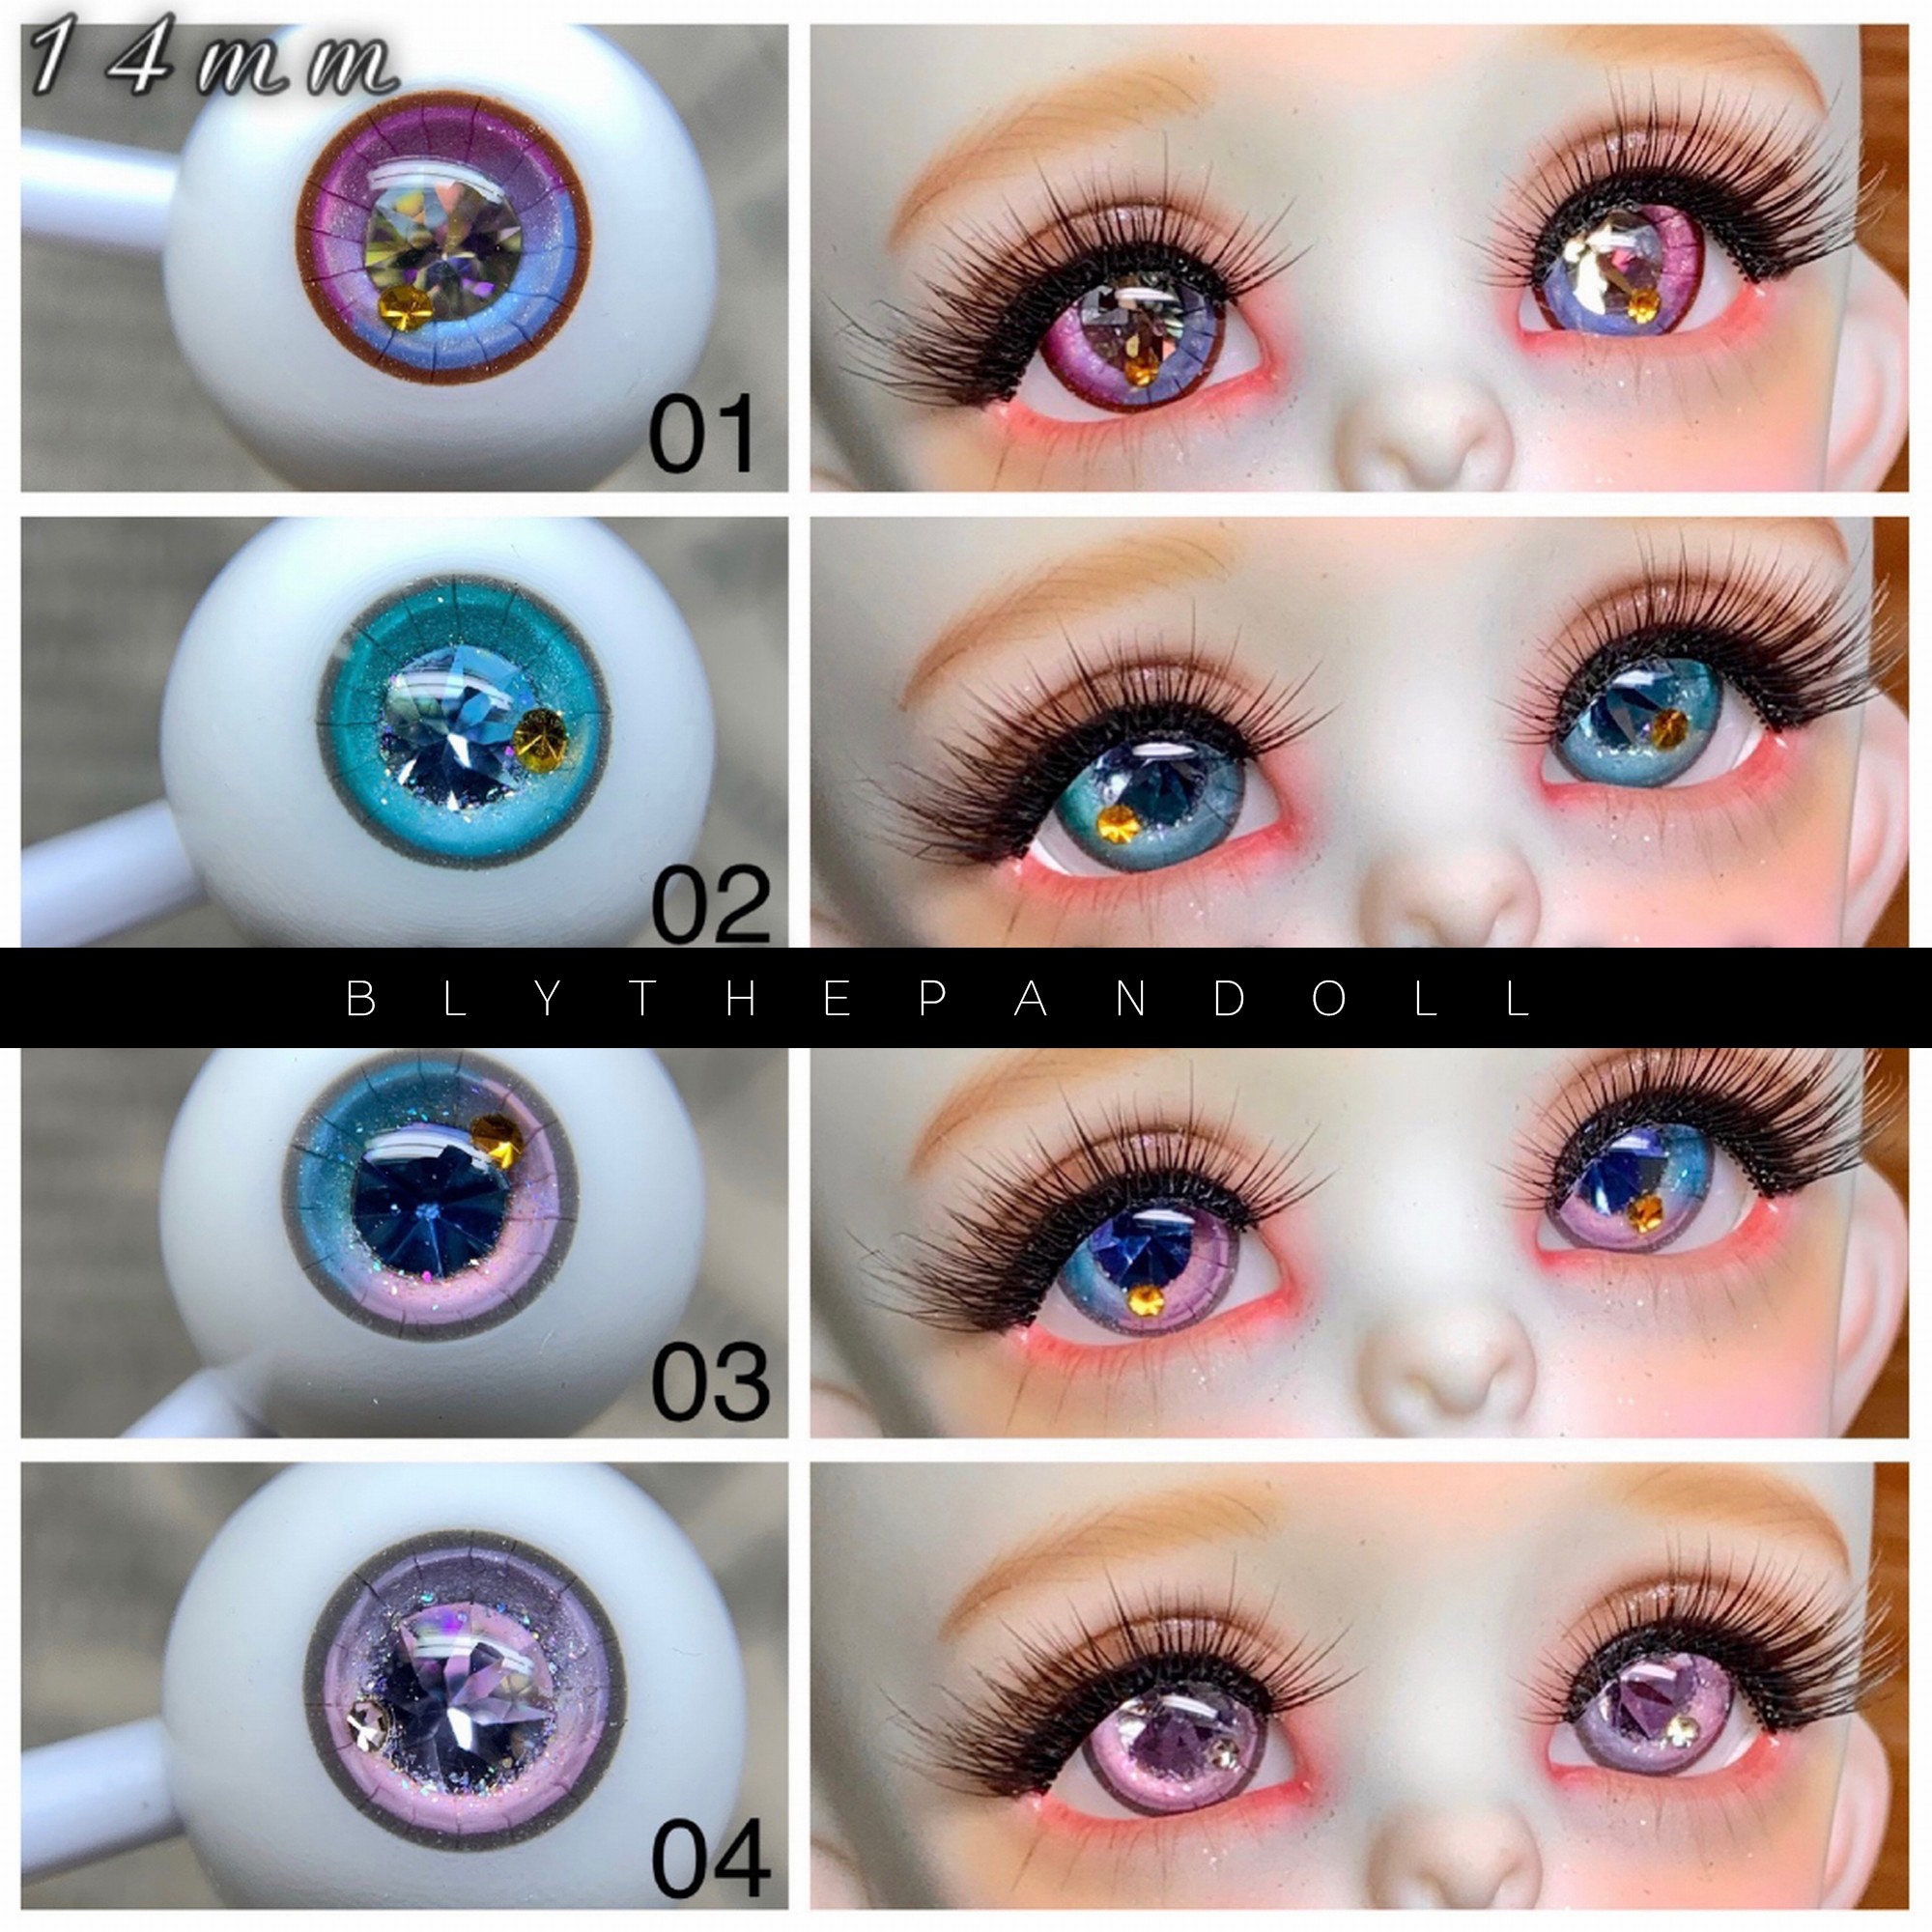  BJD Doll Eyes 1 Pair Plaster Eyeball Clear Round Ball Eyes for  1/3 1/4 1/6 BJD SD Doll Making Crafts (14mm, sunset) : Handmade Products